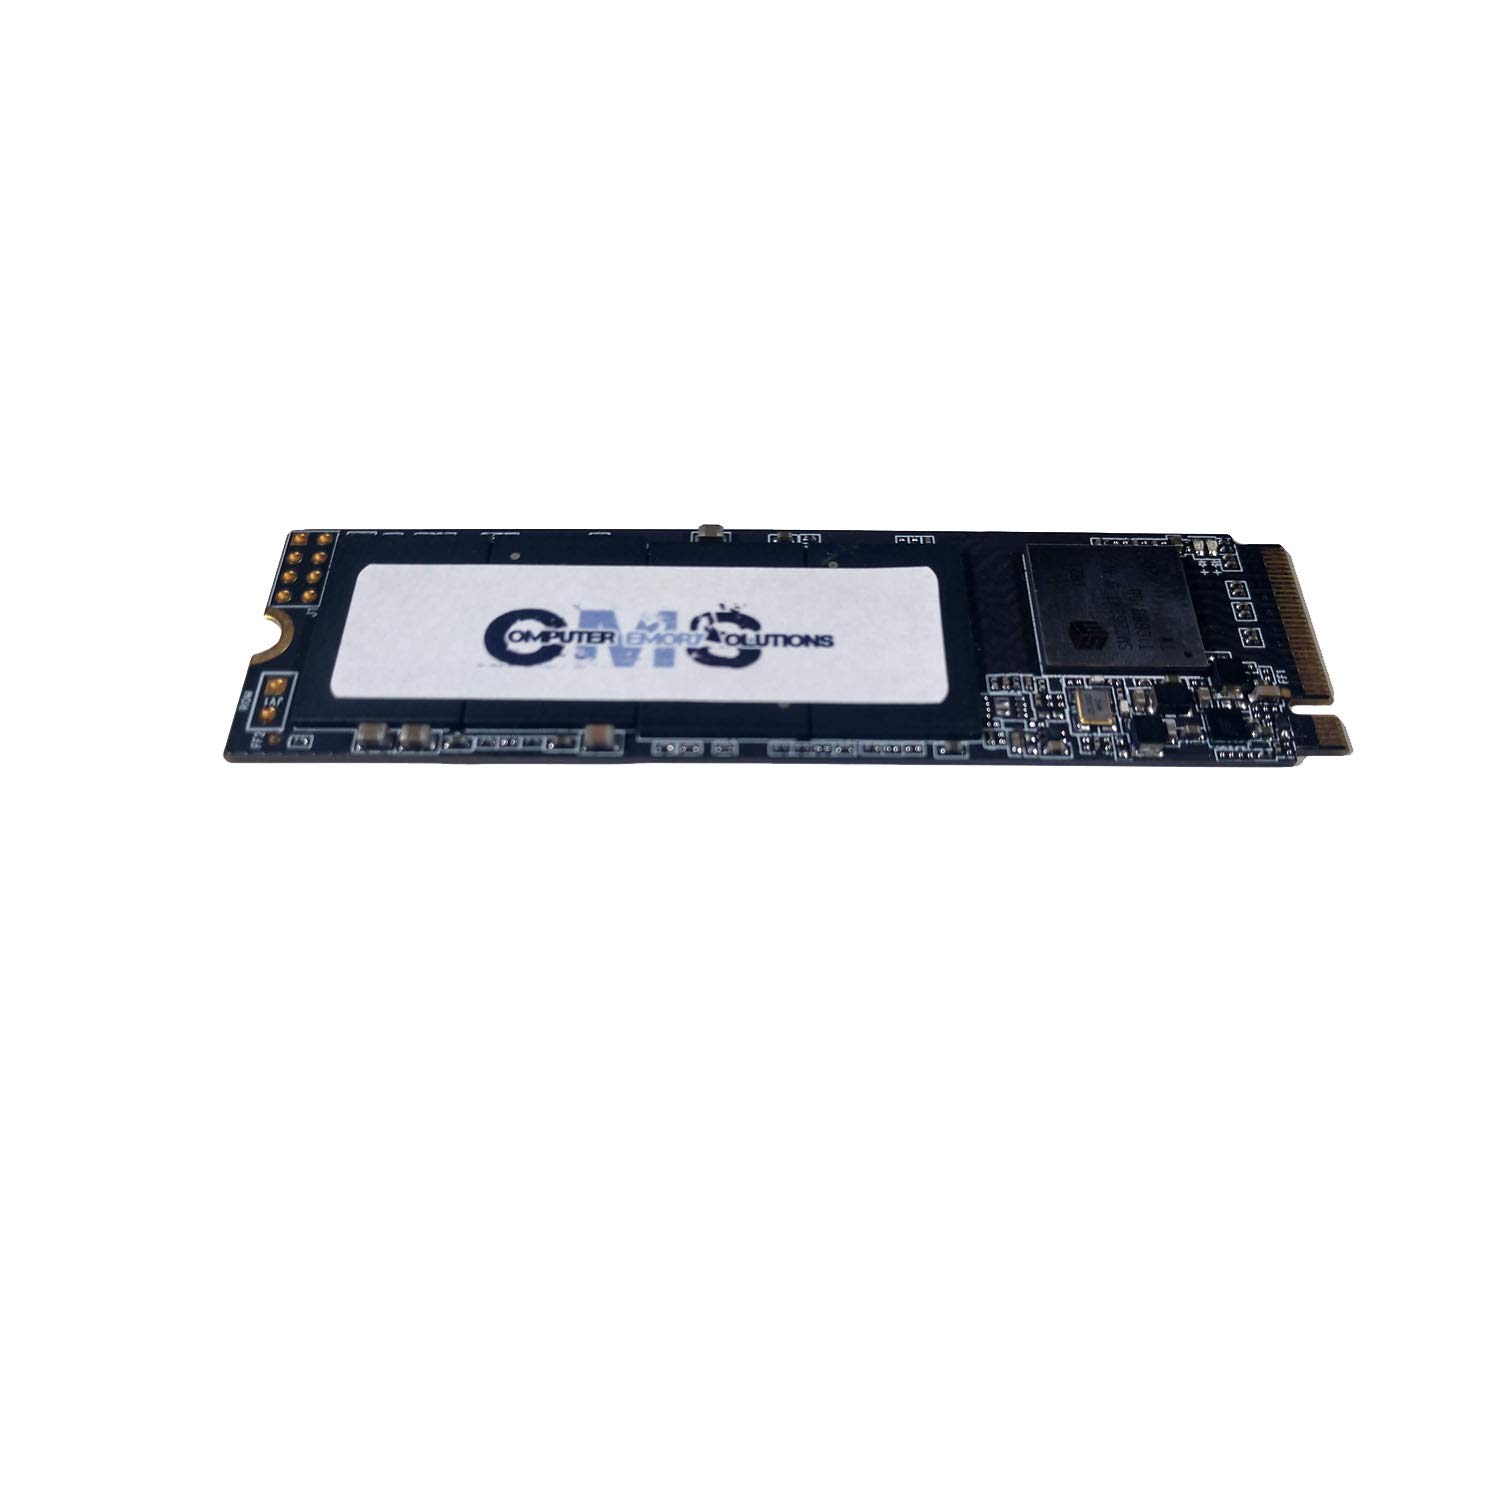 Computer Memory Solutions CMS 1TB Internal SSD M.2 2280 NVMe PCIe Compatible with Lenovo Ideapad S340-15IIL (15) Series, S340-14IIL (14) Series, S340 (15) Series, S340-14API, S340-14IML - D95